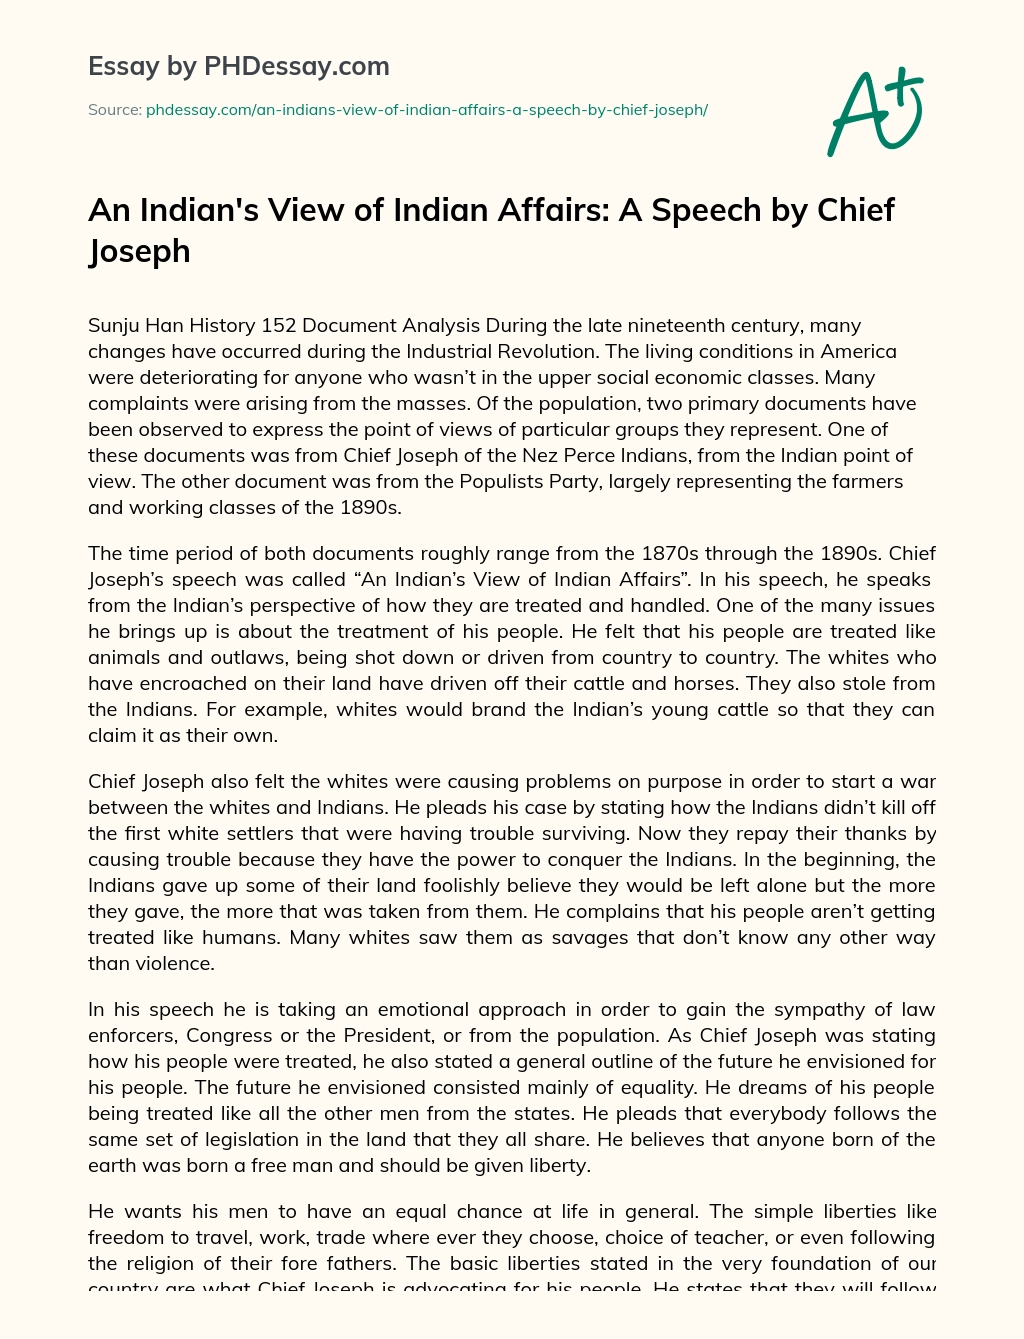 An Indian’s View of Indian Affairs: A Speech by Chief Joseph essay